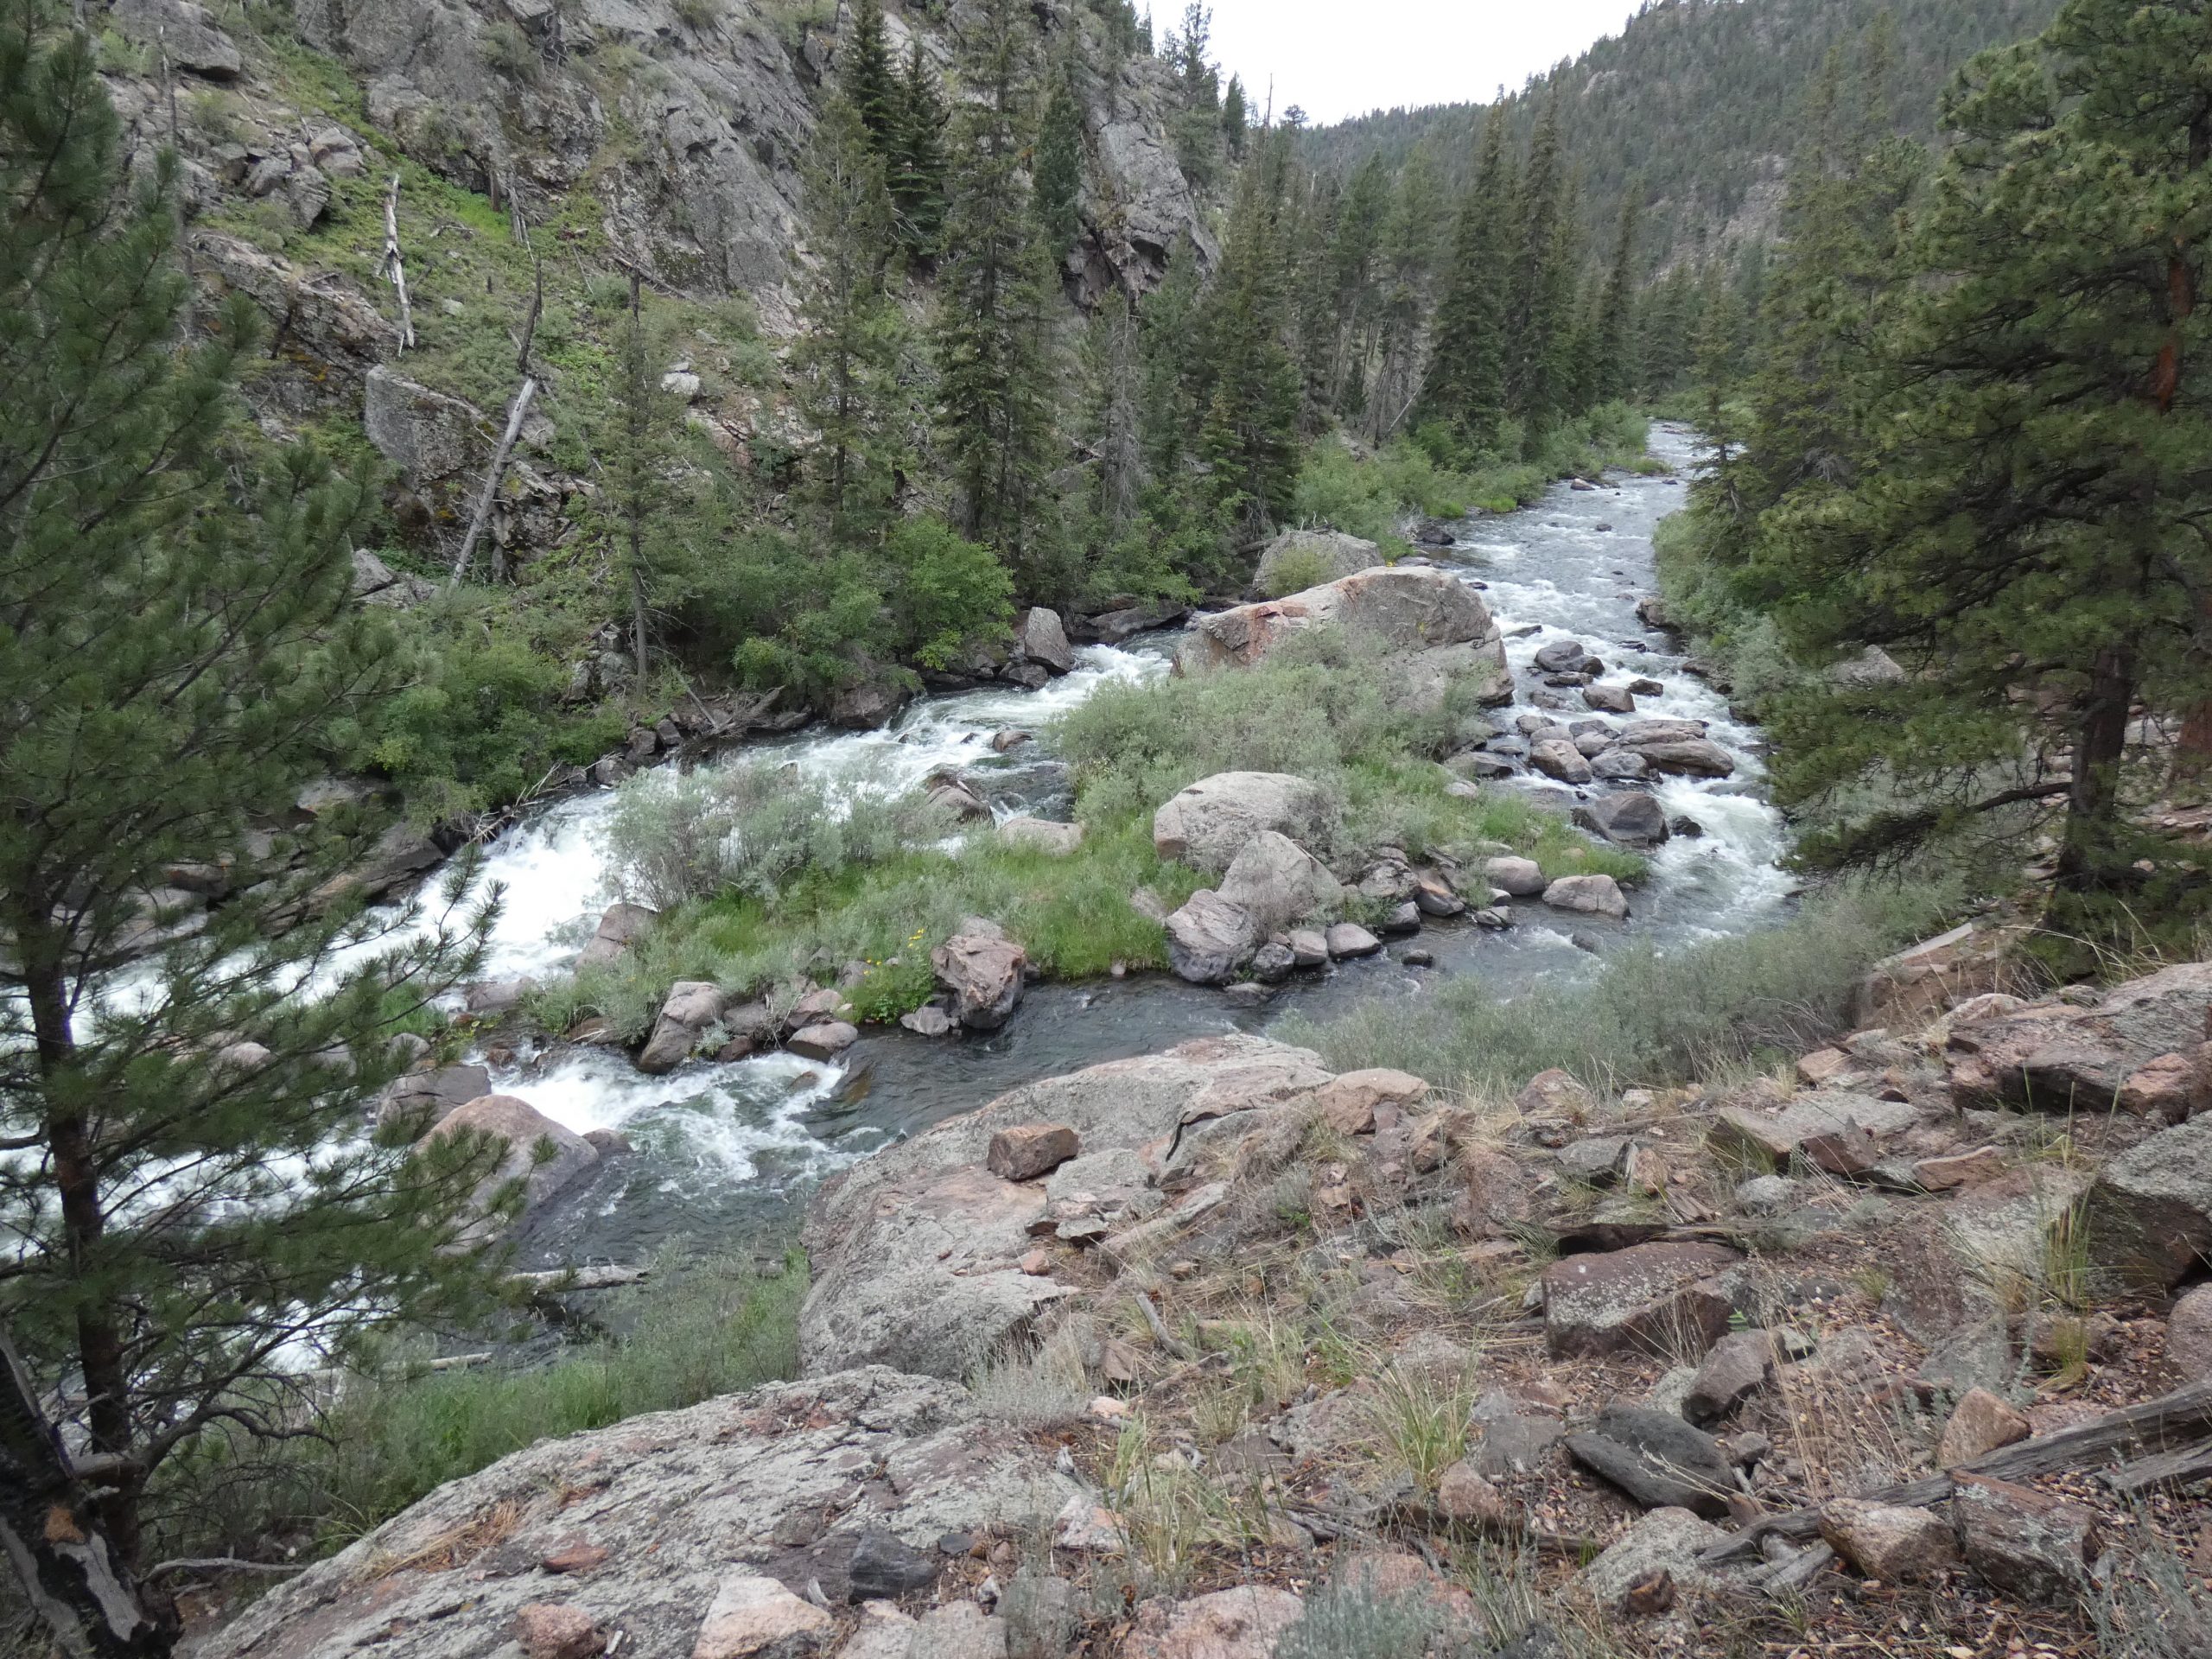 South Platte River off Plate River Trail #654